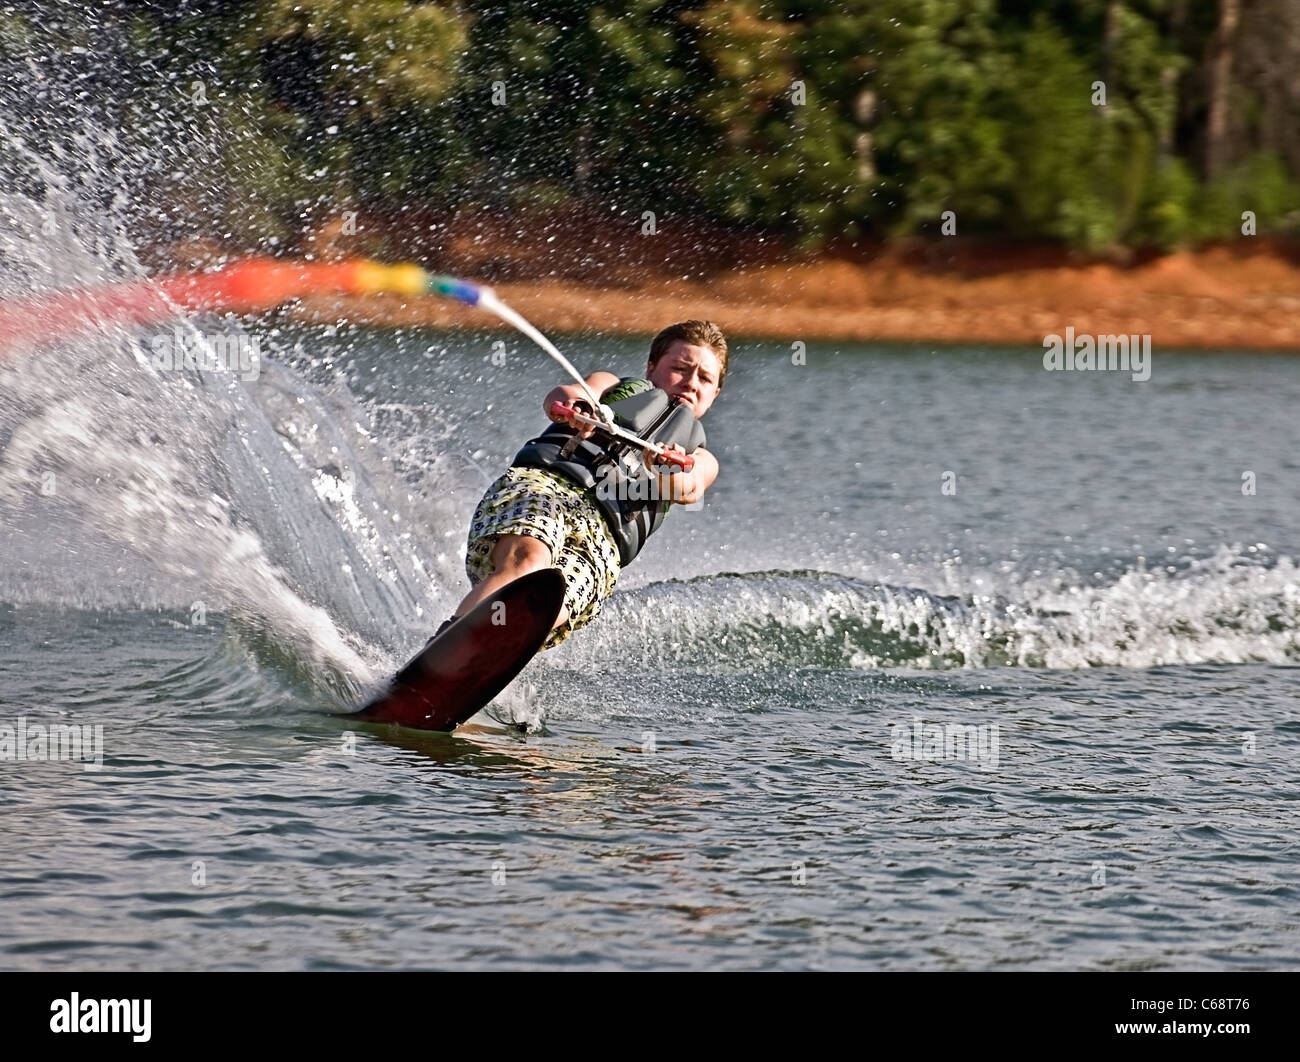 A preteen boy on a slalom ski cutting across the wake with an expression of total concentration. Stock Photo